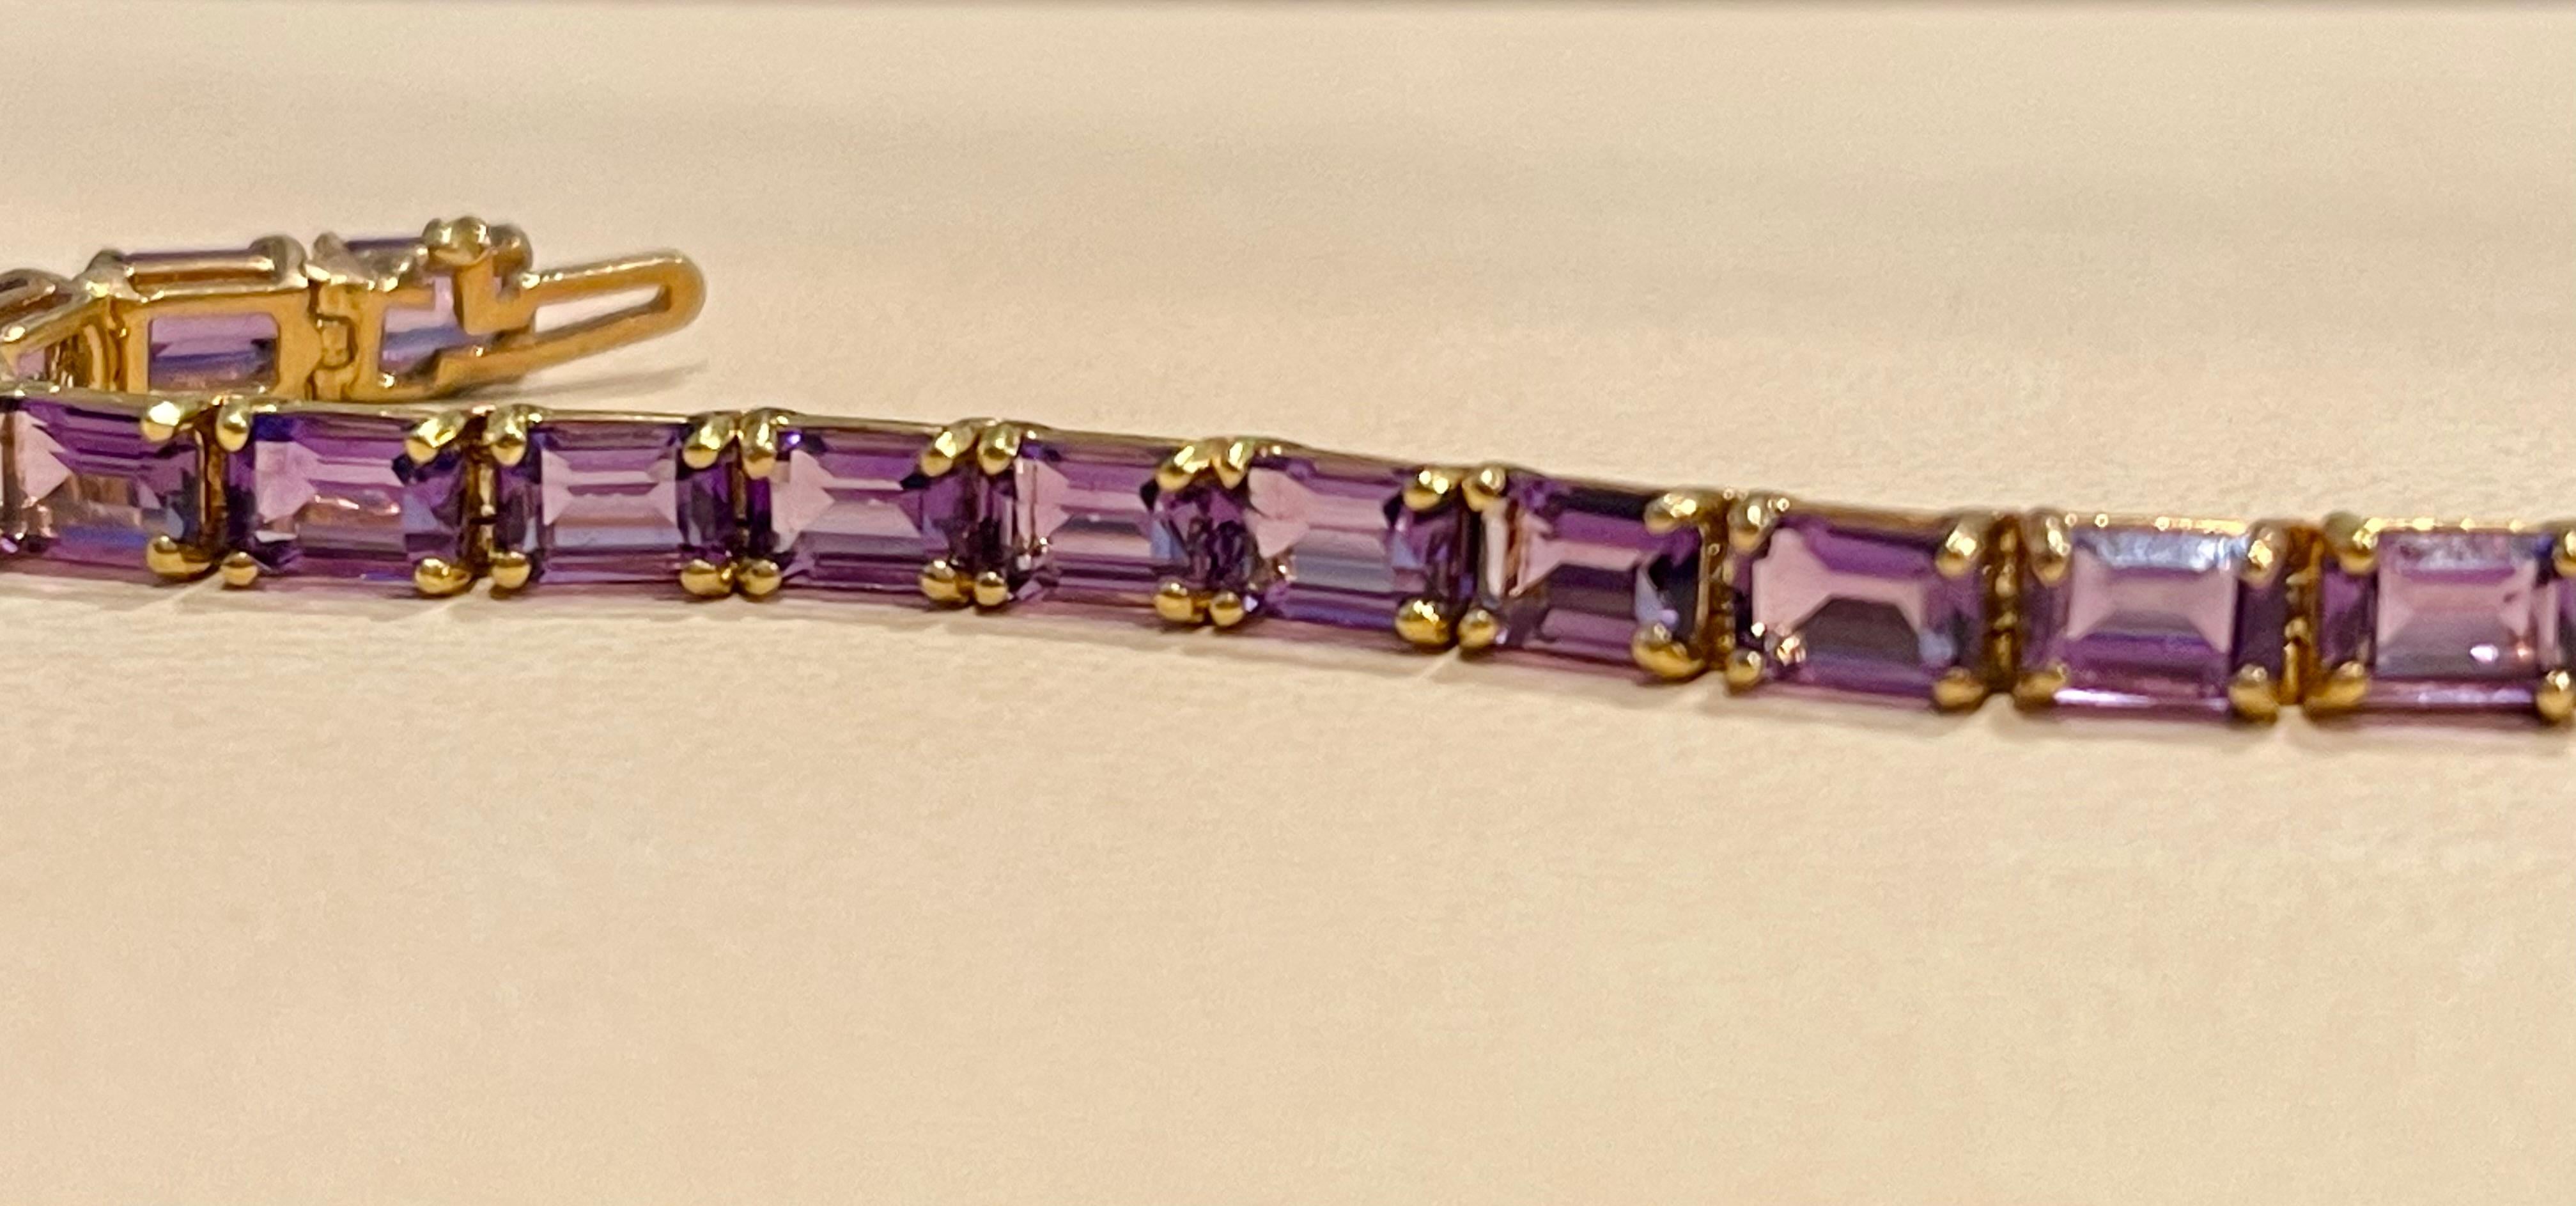 13 Carat Genuine Natural Amethyst Tennis Bracelet 14 Karat Yellow Gold In Excellent Condition For Sale In New York, NY